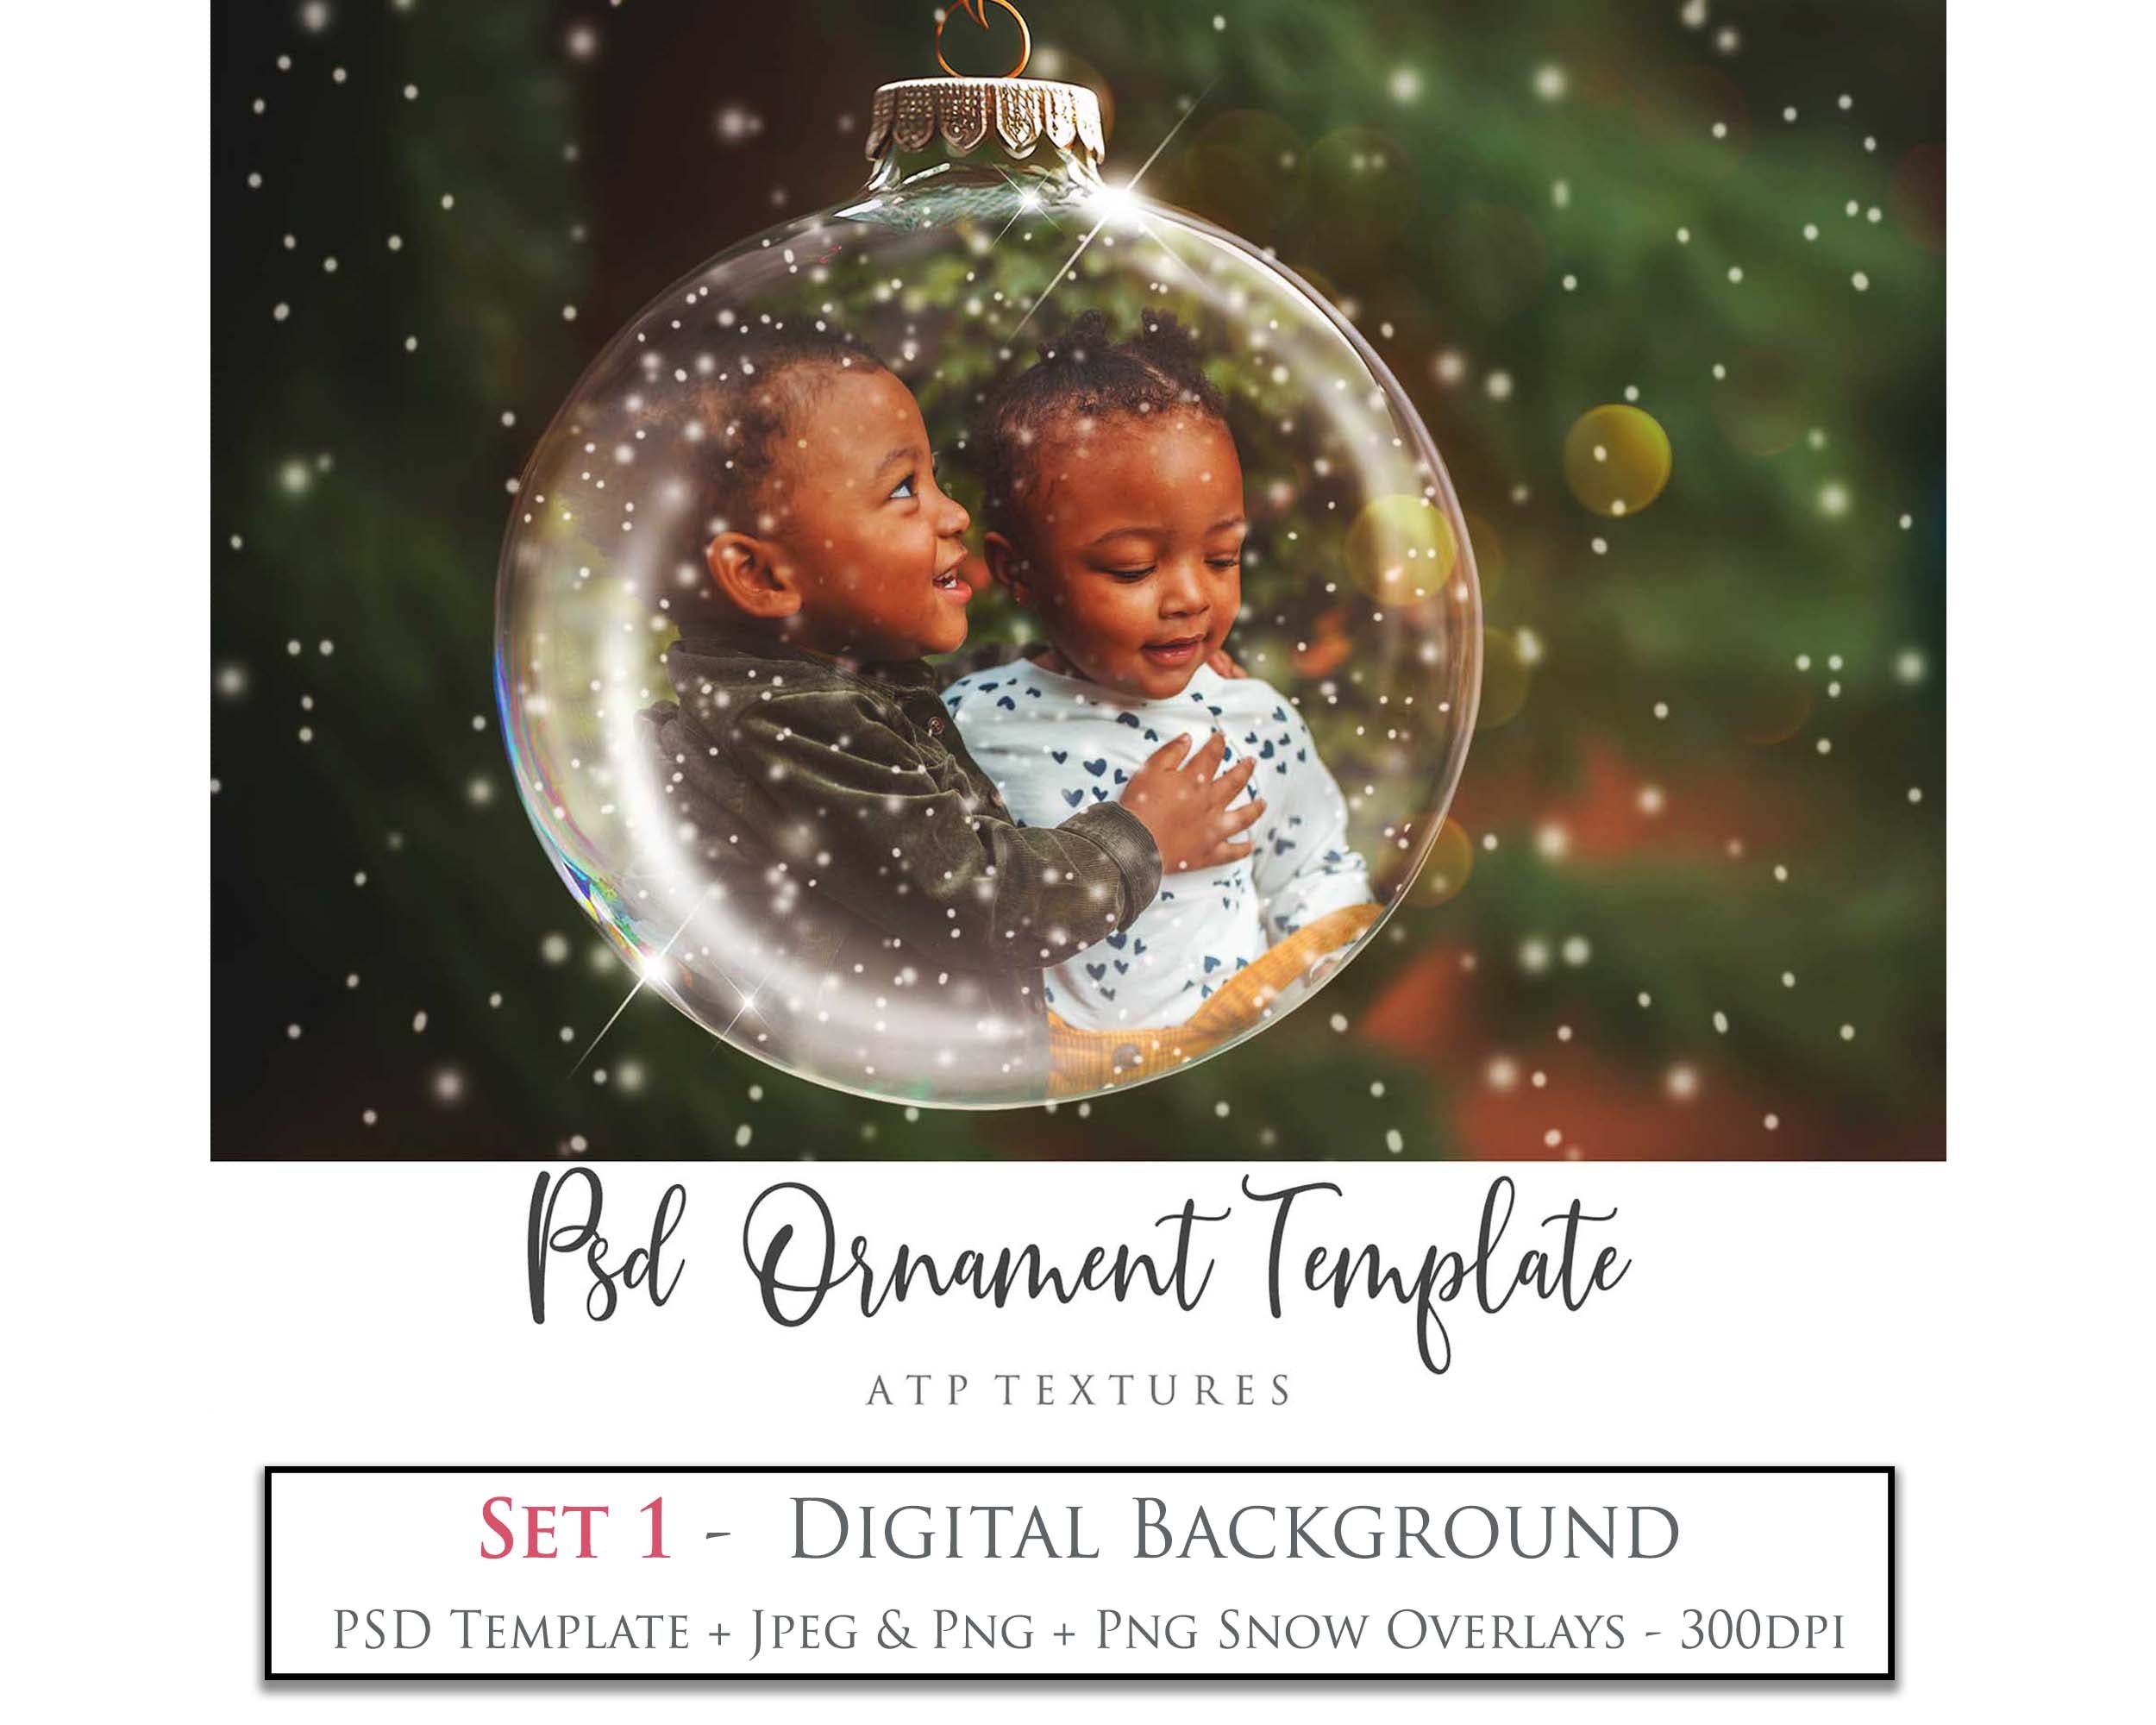 Christmas Glass Bauble Ornament Overlay and Digital Png Background. Snow flurries and PSD template included. The globe is transparent, perfect for you to add your own images and retain the snow globe effect.This file is 6000 x 4000, 300dpi. Photography, Scrapbooking, Photo Overlays, Png, Jpeg, Psd. ATP Textures.